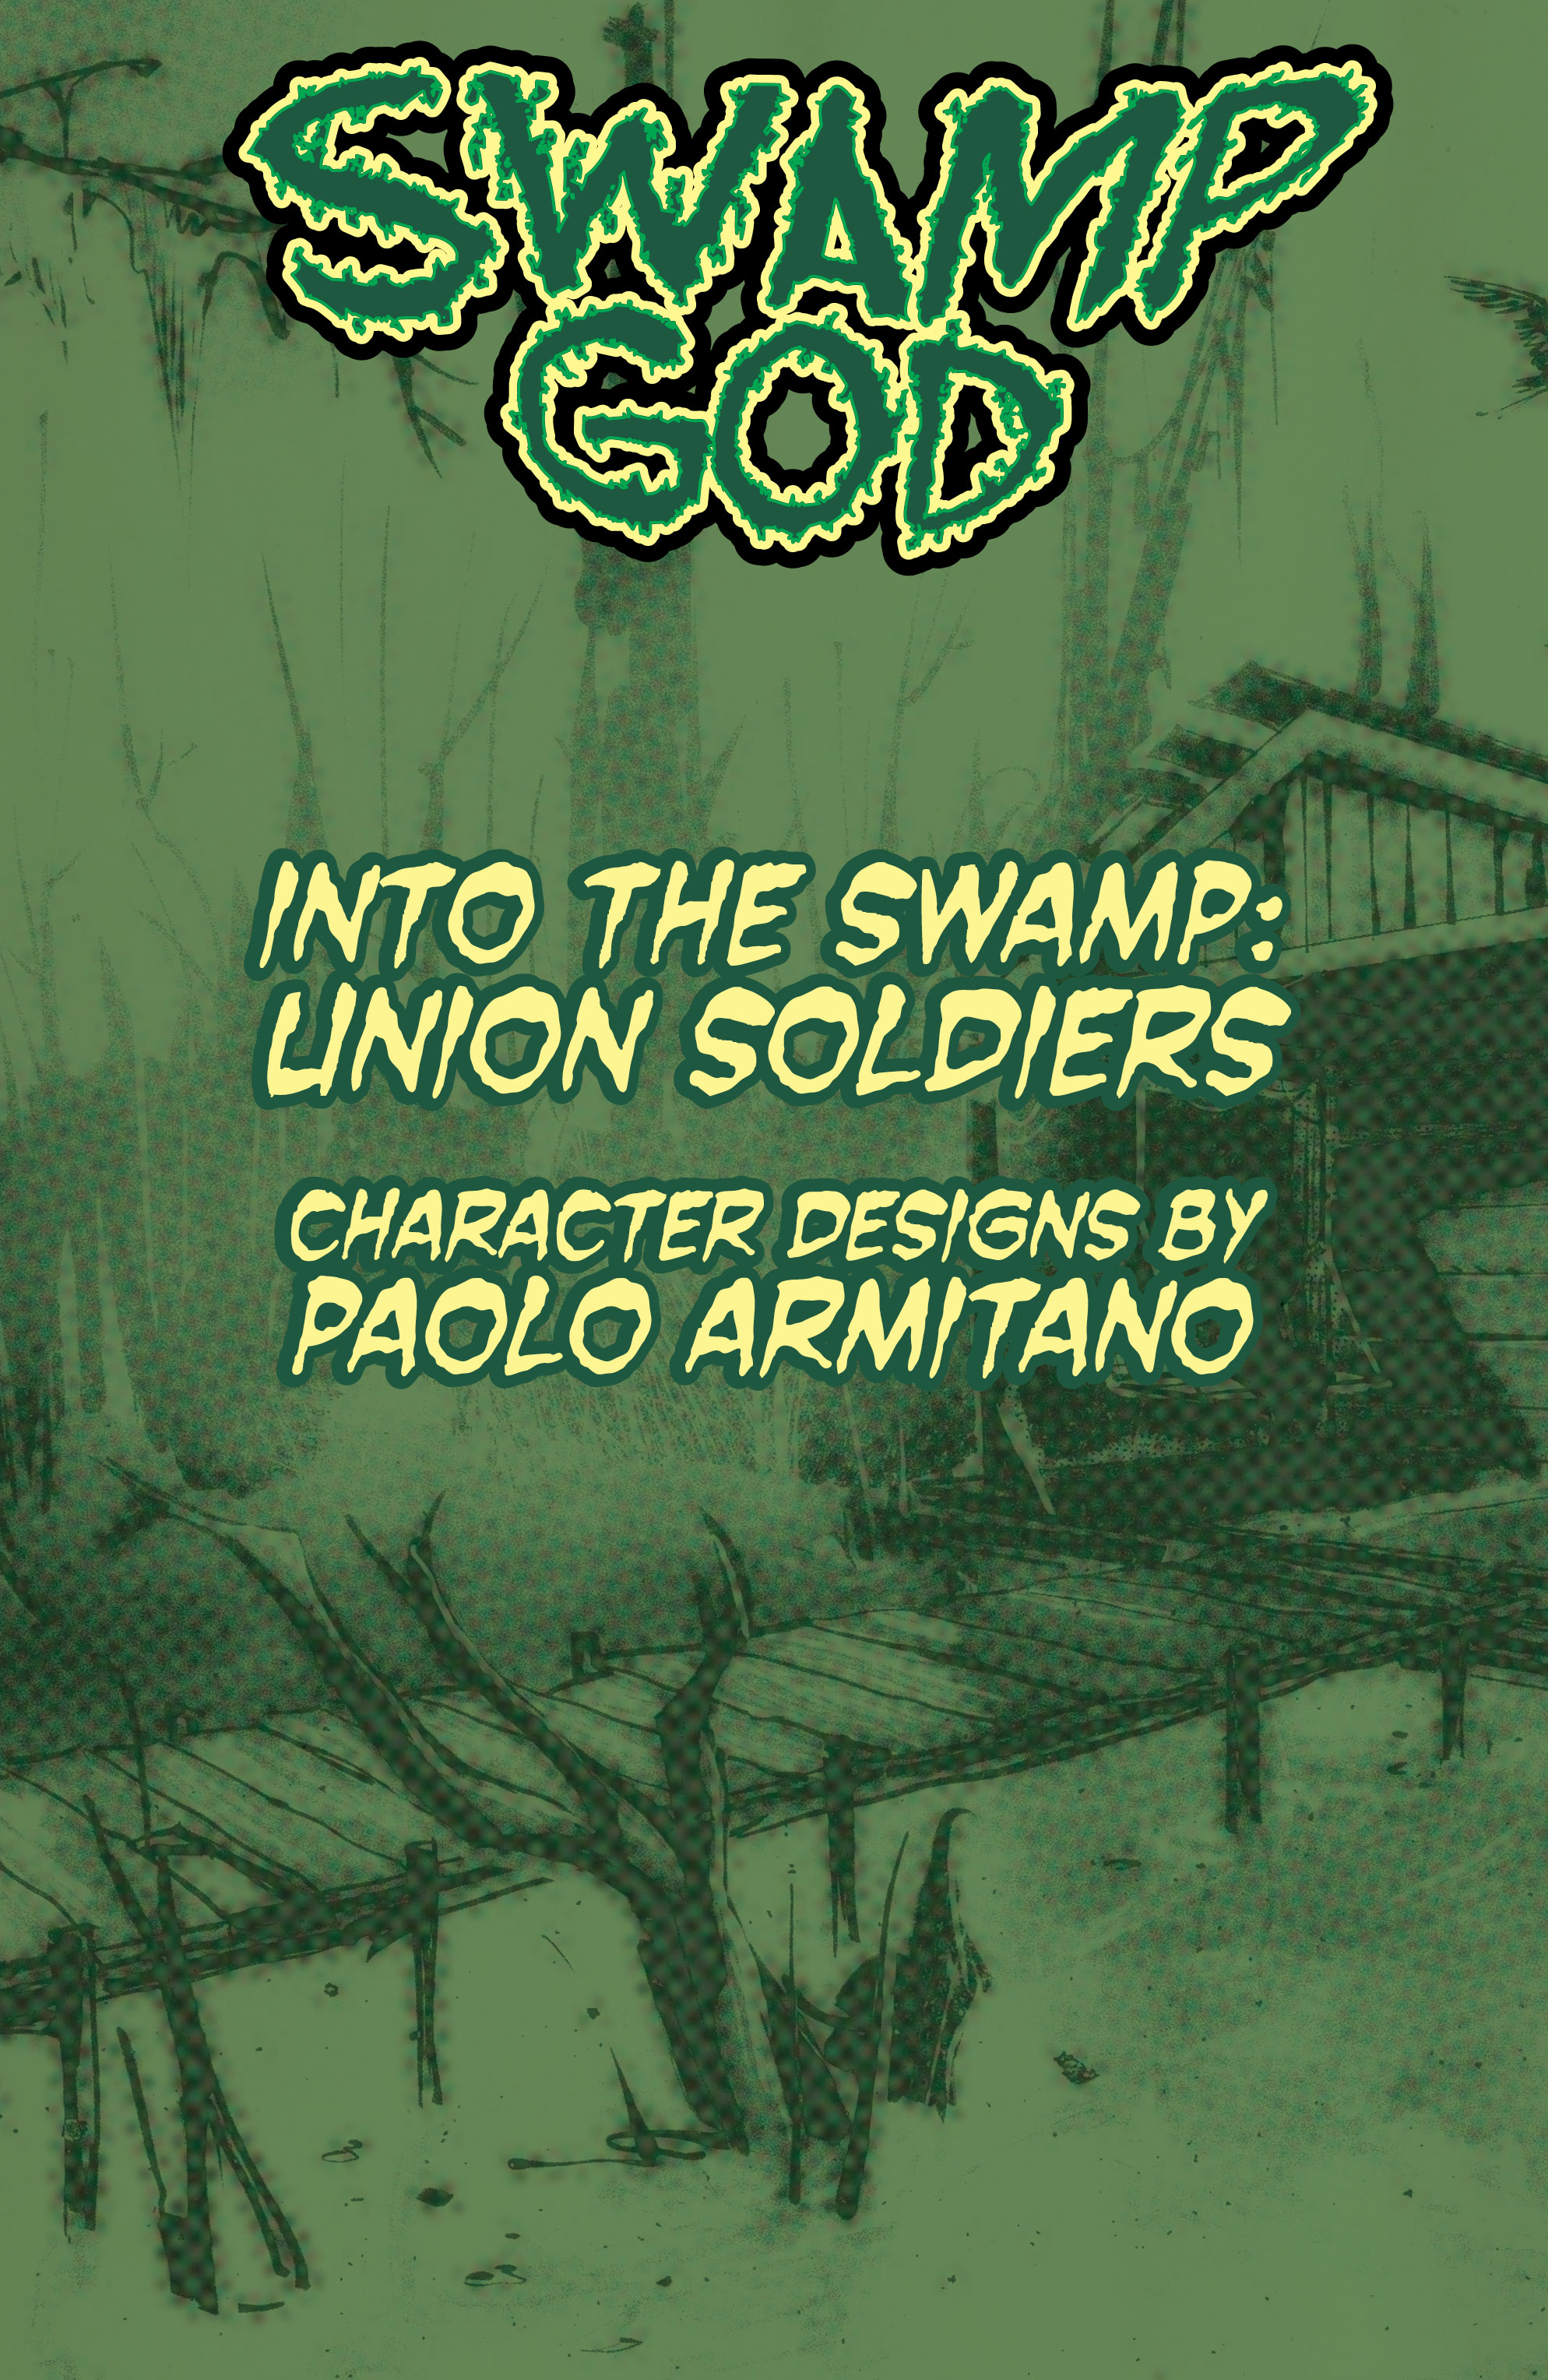 Read online Swamp God comic -  Issue #1 - 17